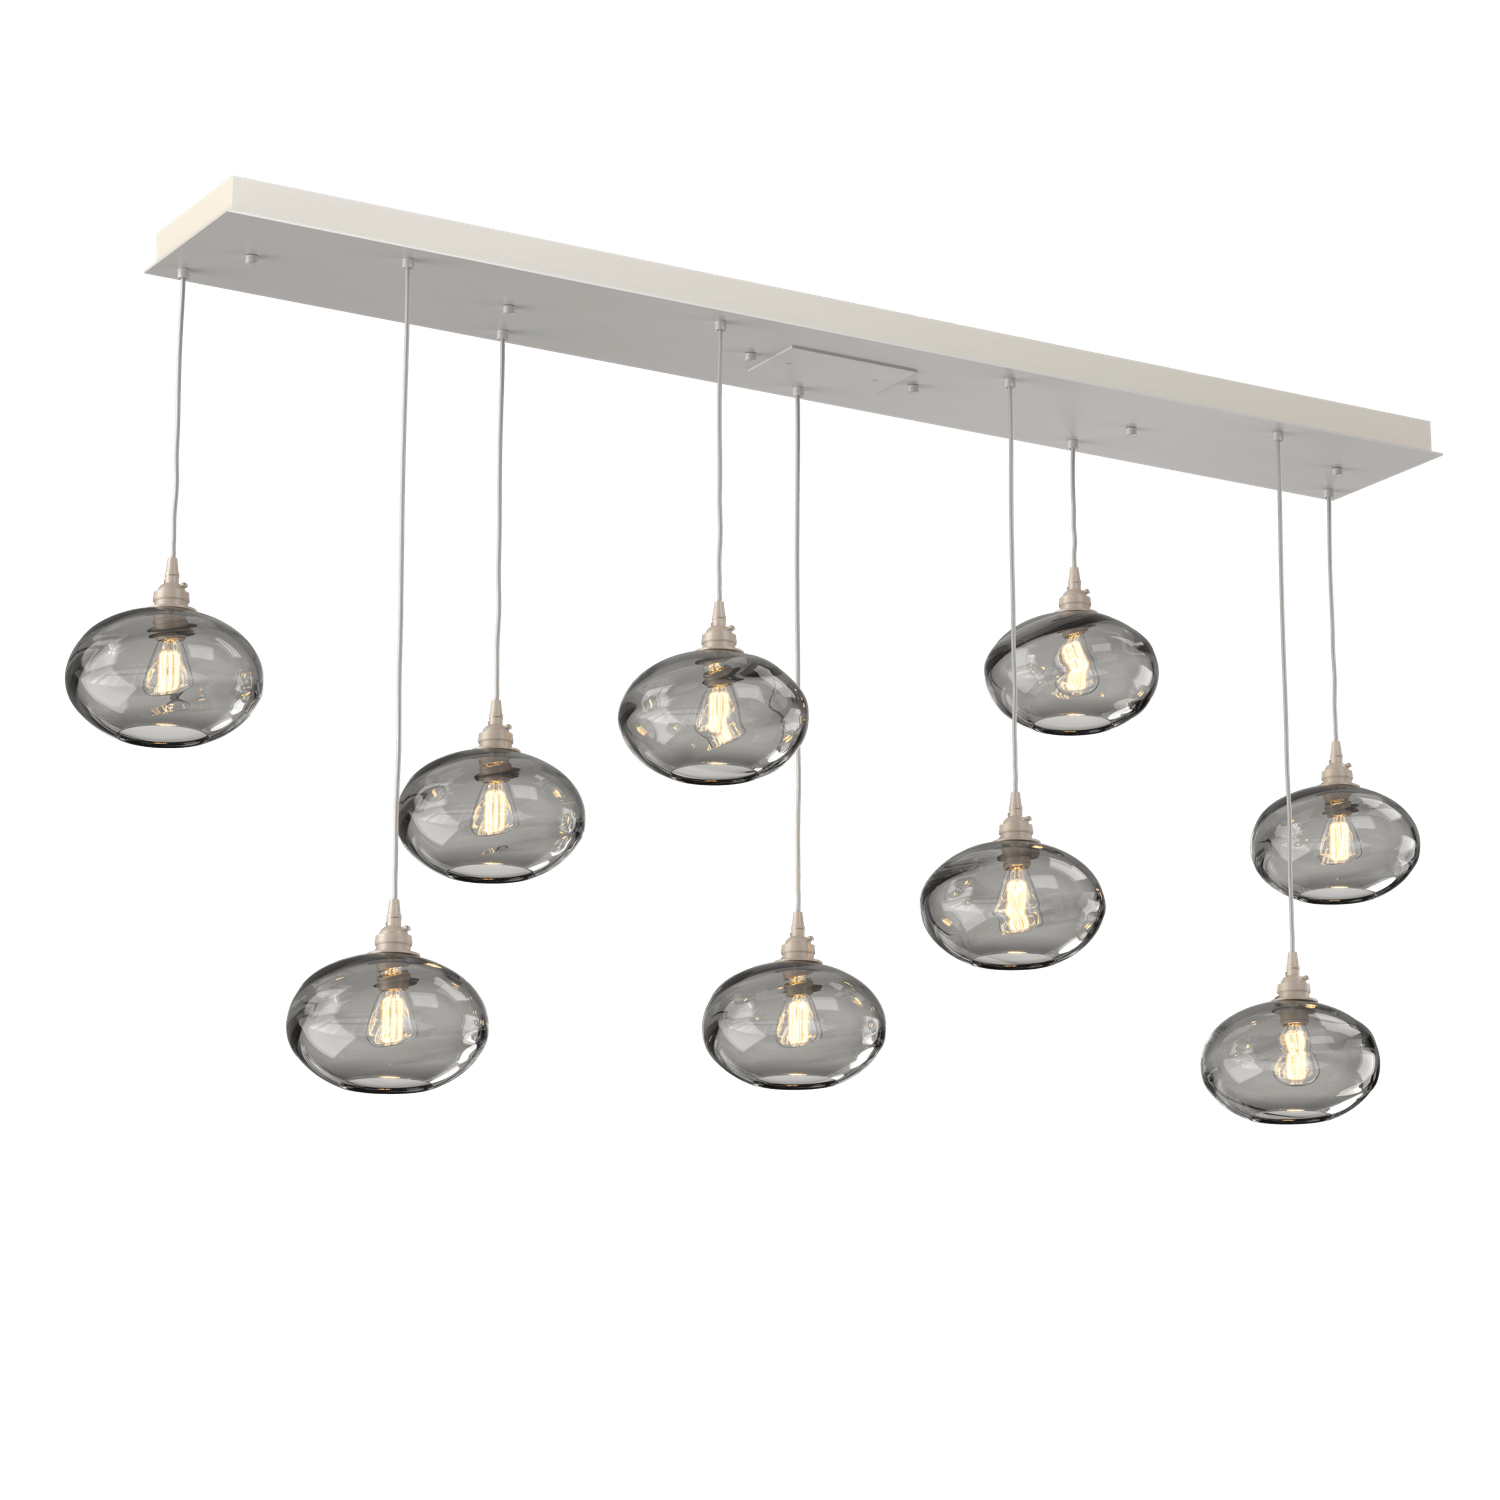 PLB0036-09-BS-OS-Hammerton-Studio-Optic-Blown-Glass-Coppa-9-light-linear-pendant-chandelier-with-metallic-beige-silver-finish-and-optic-smoke-blown-glass-shades-and-incandescent-lamping